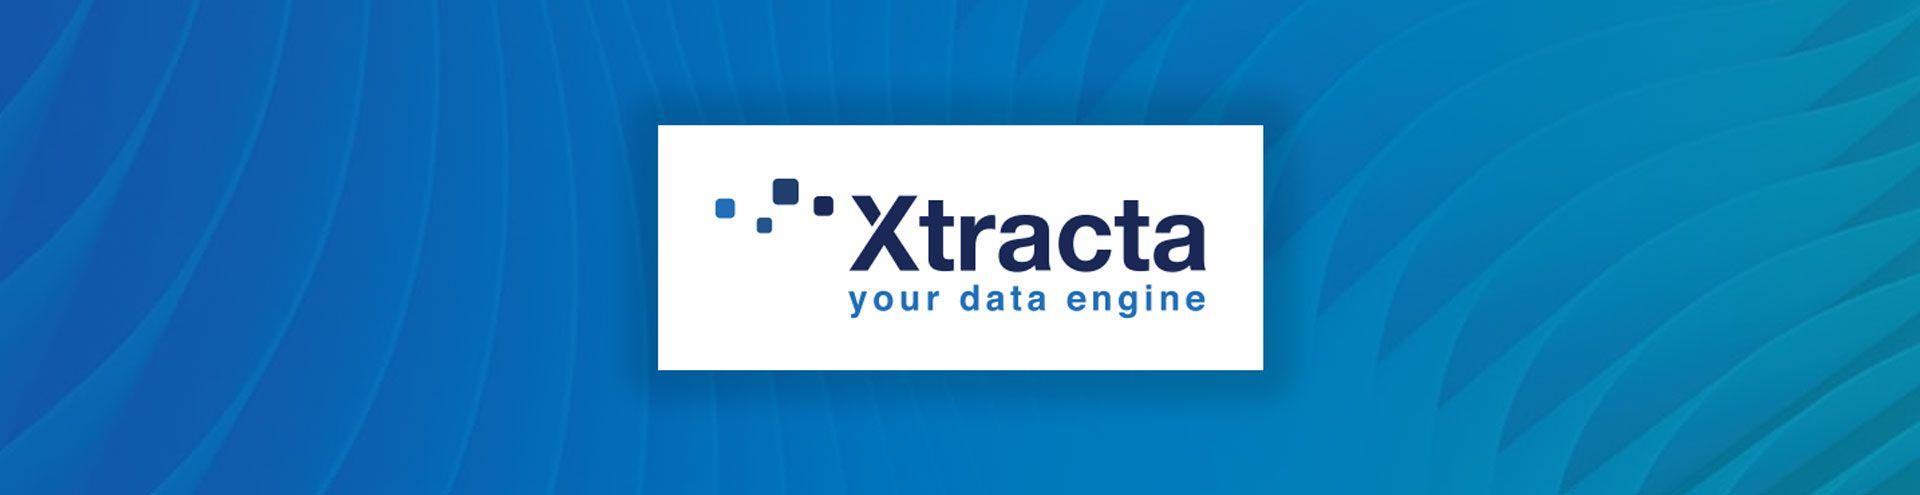 Automated Invoice Processing for Your Marketplace: Xtracta Integration